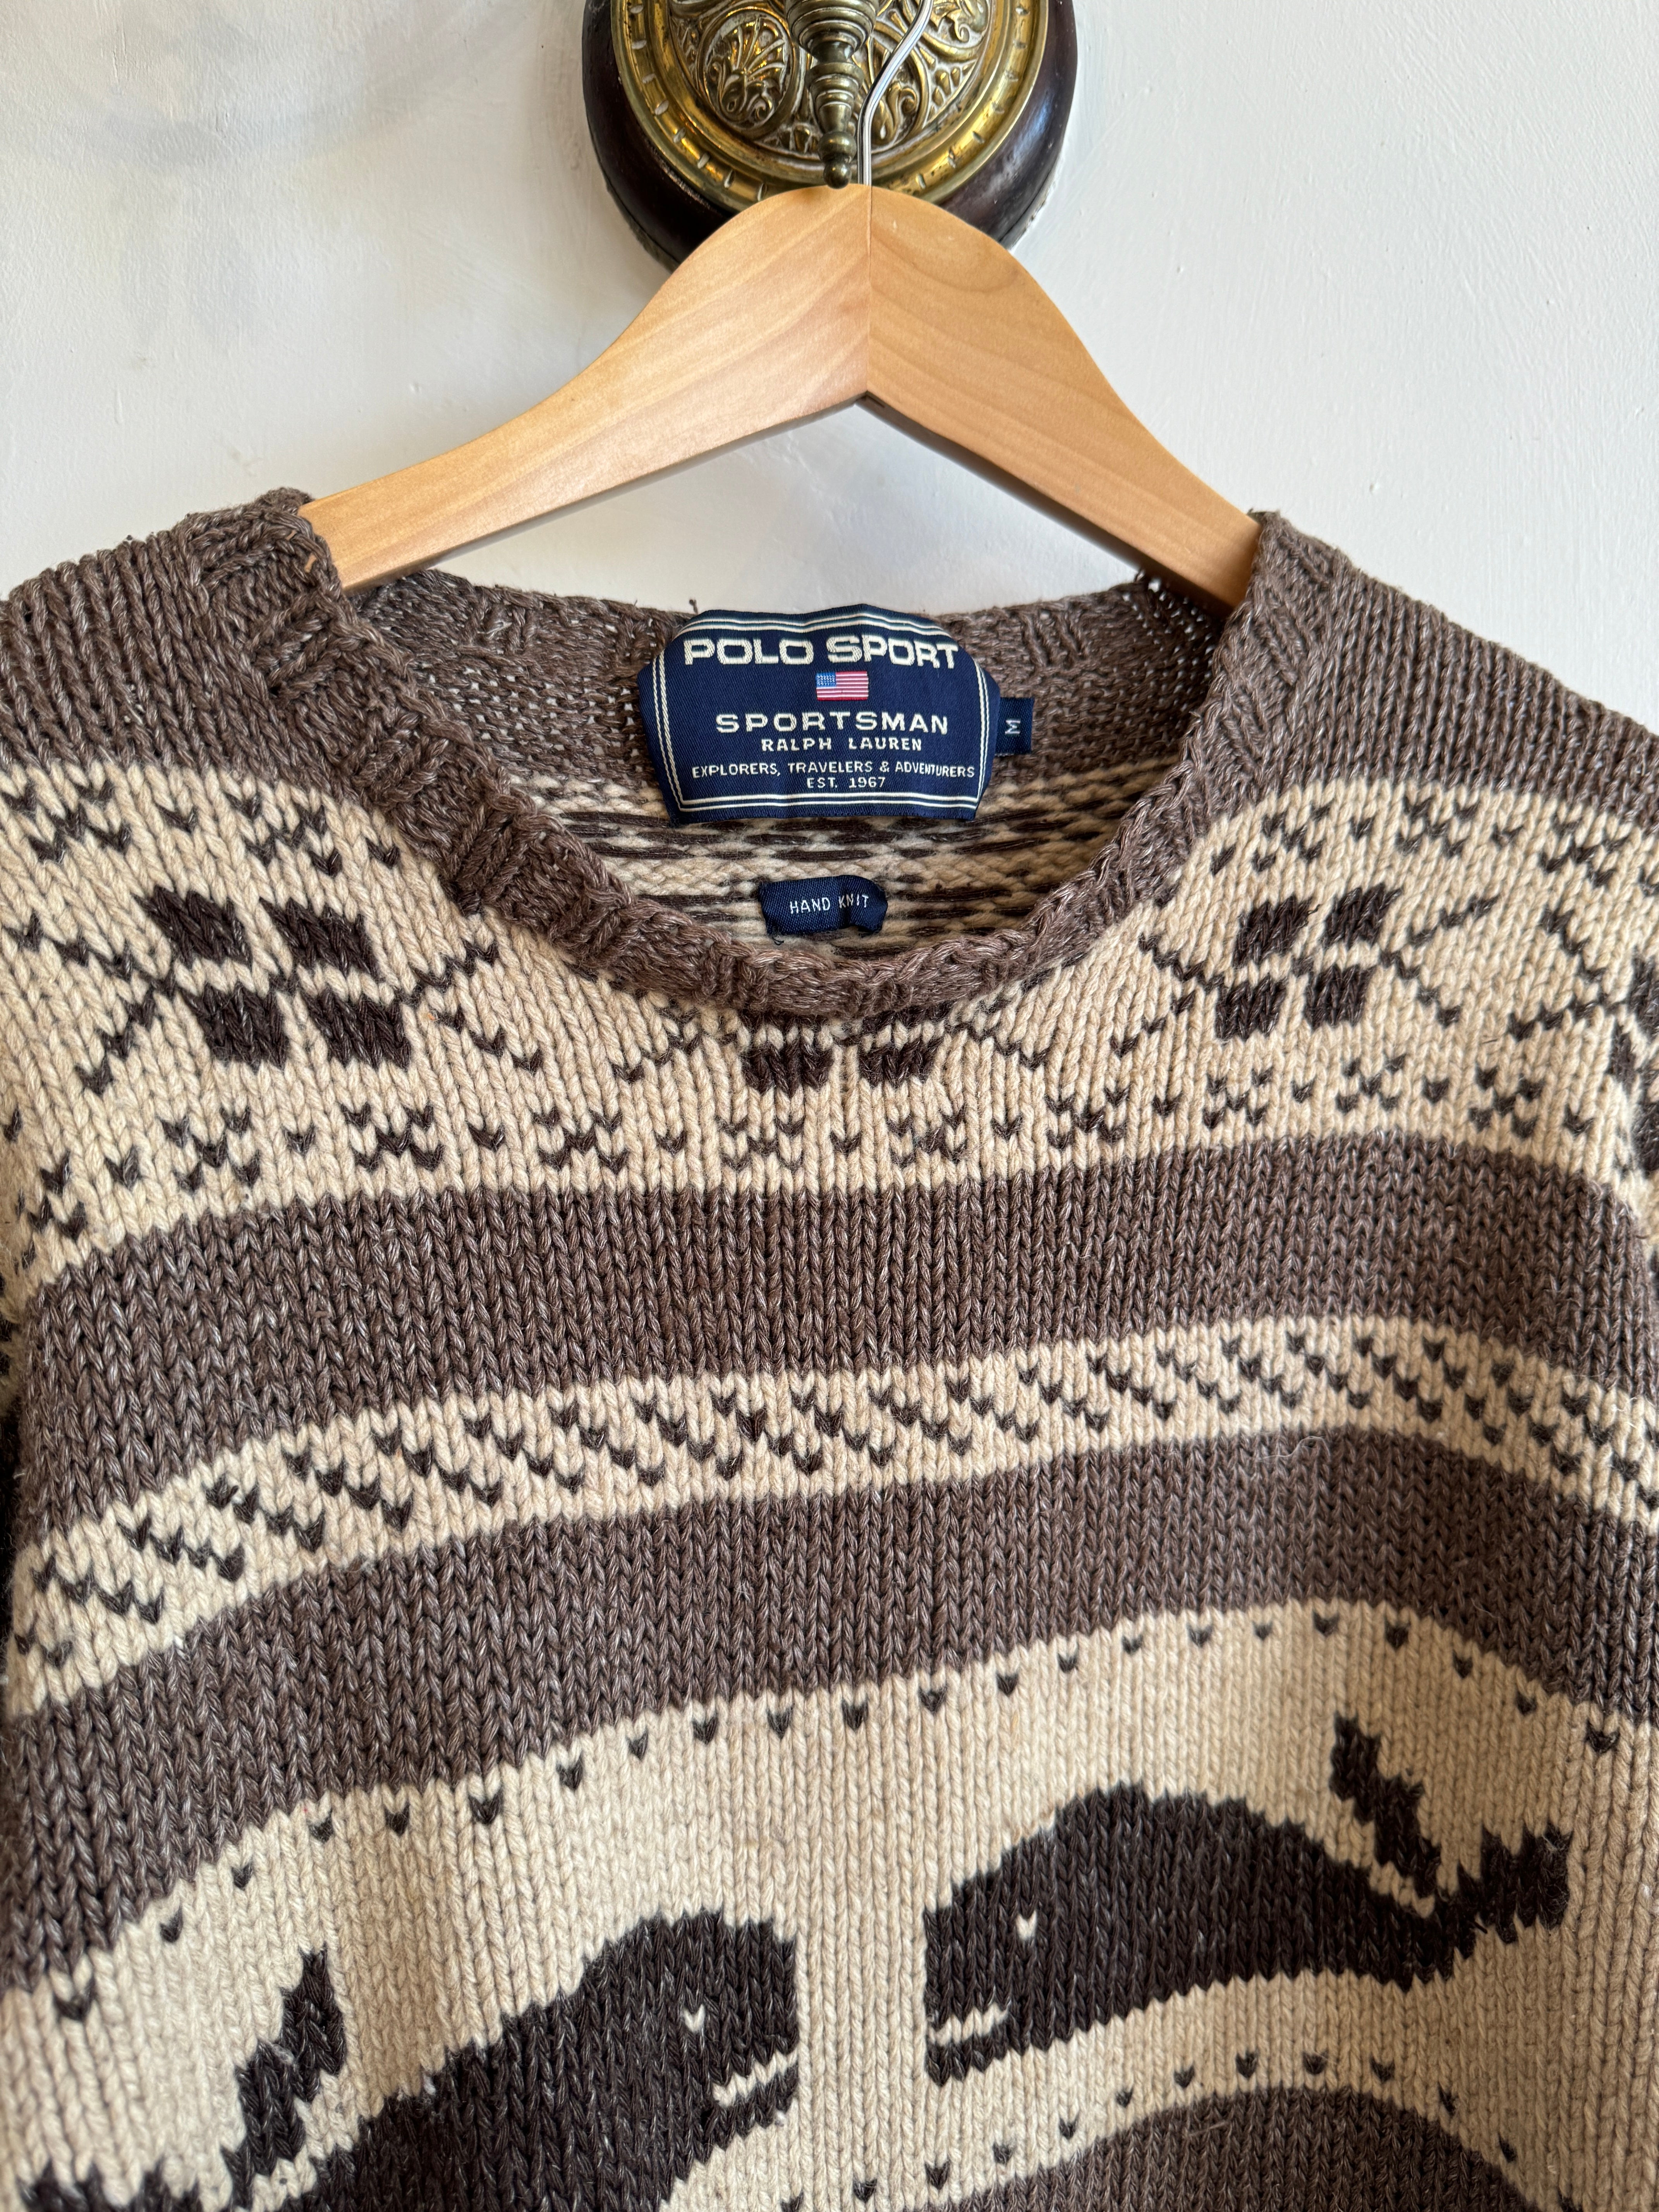 Vintage Polo Ralph Lauren Hand Knit Jumper with Whales